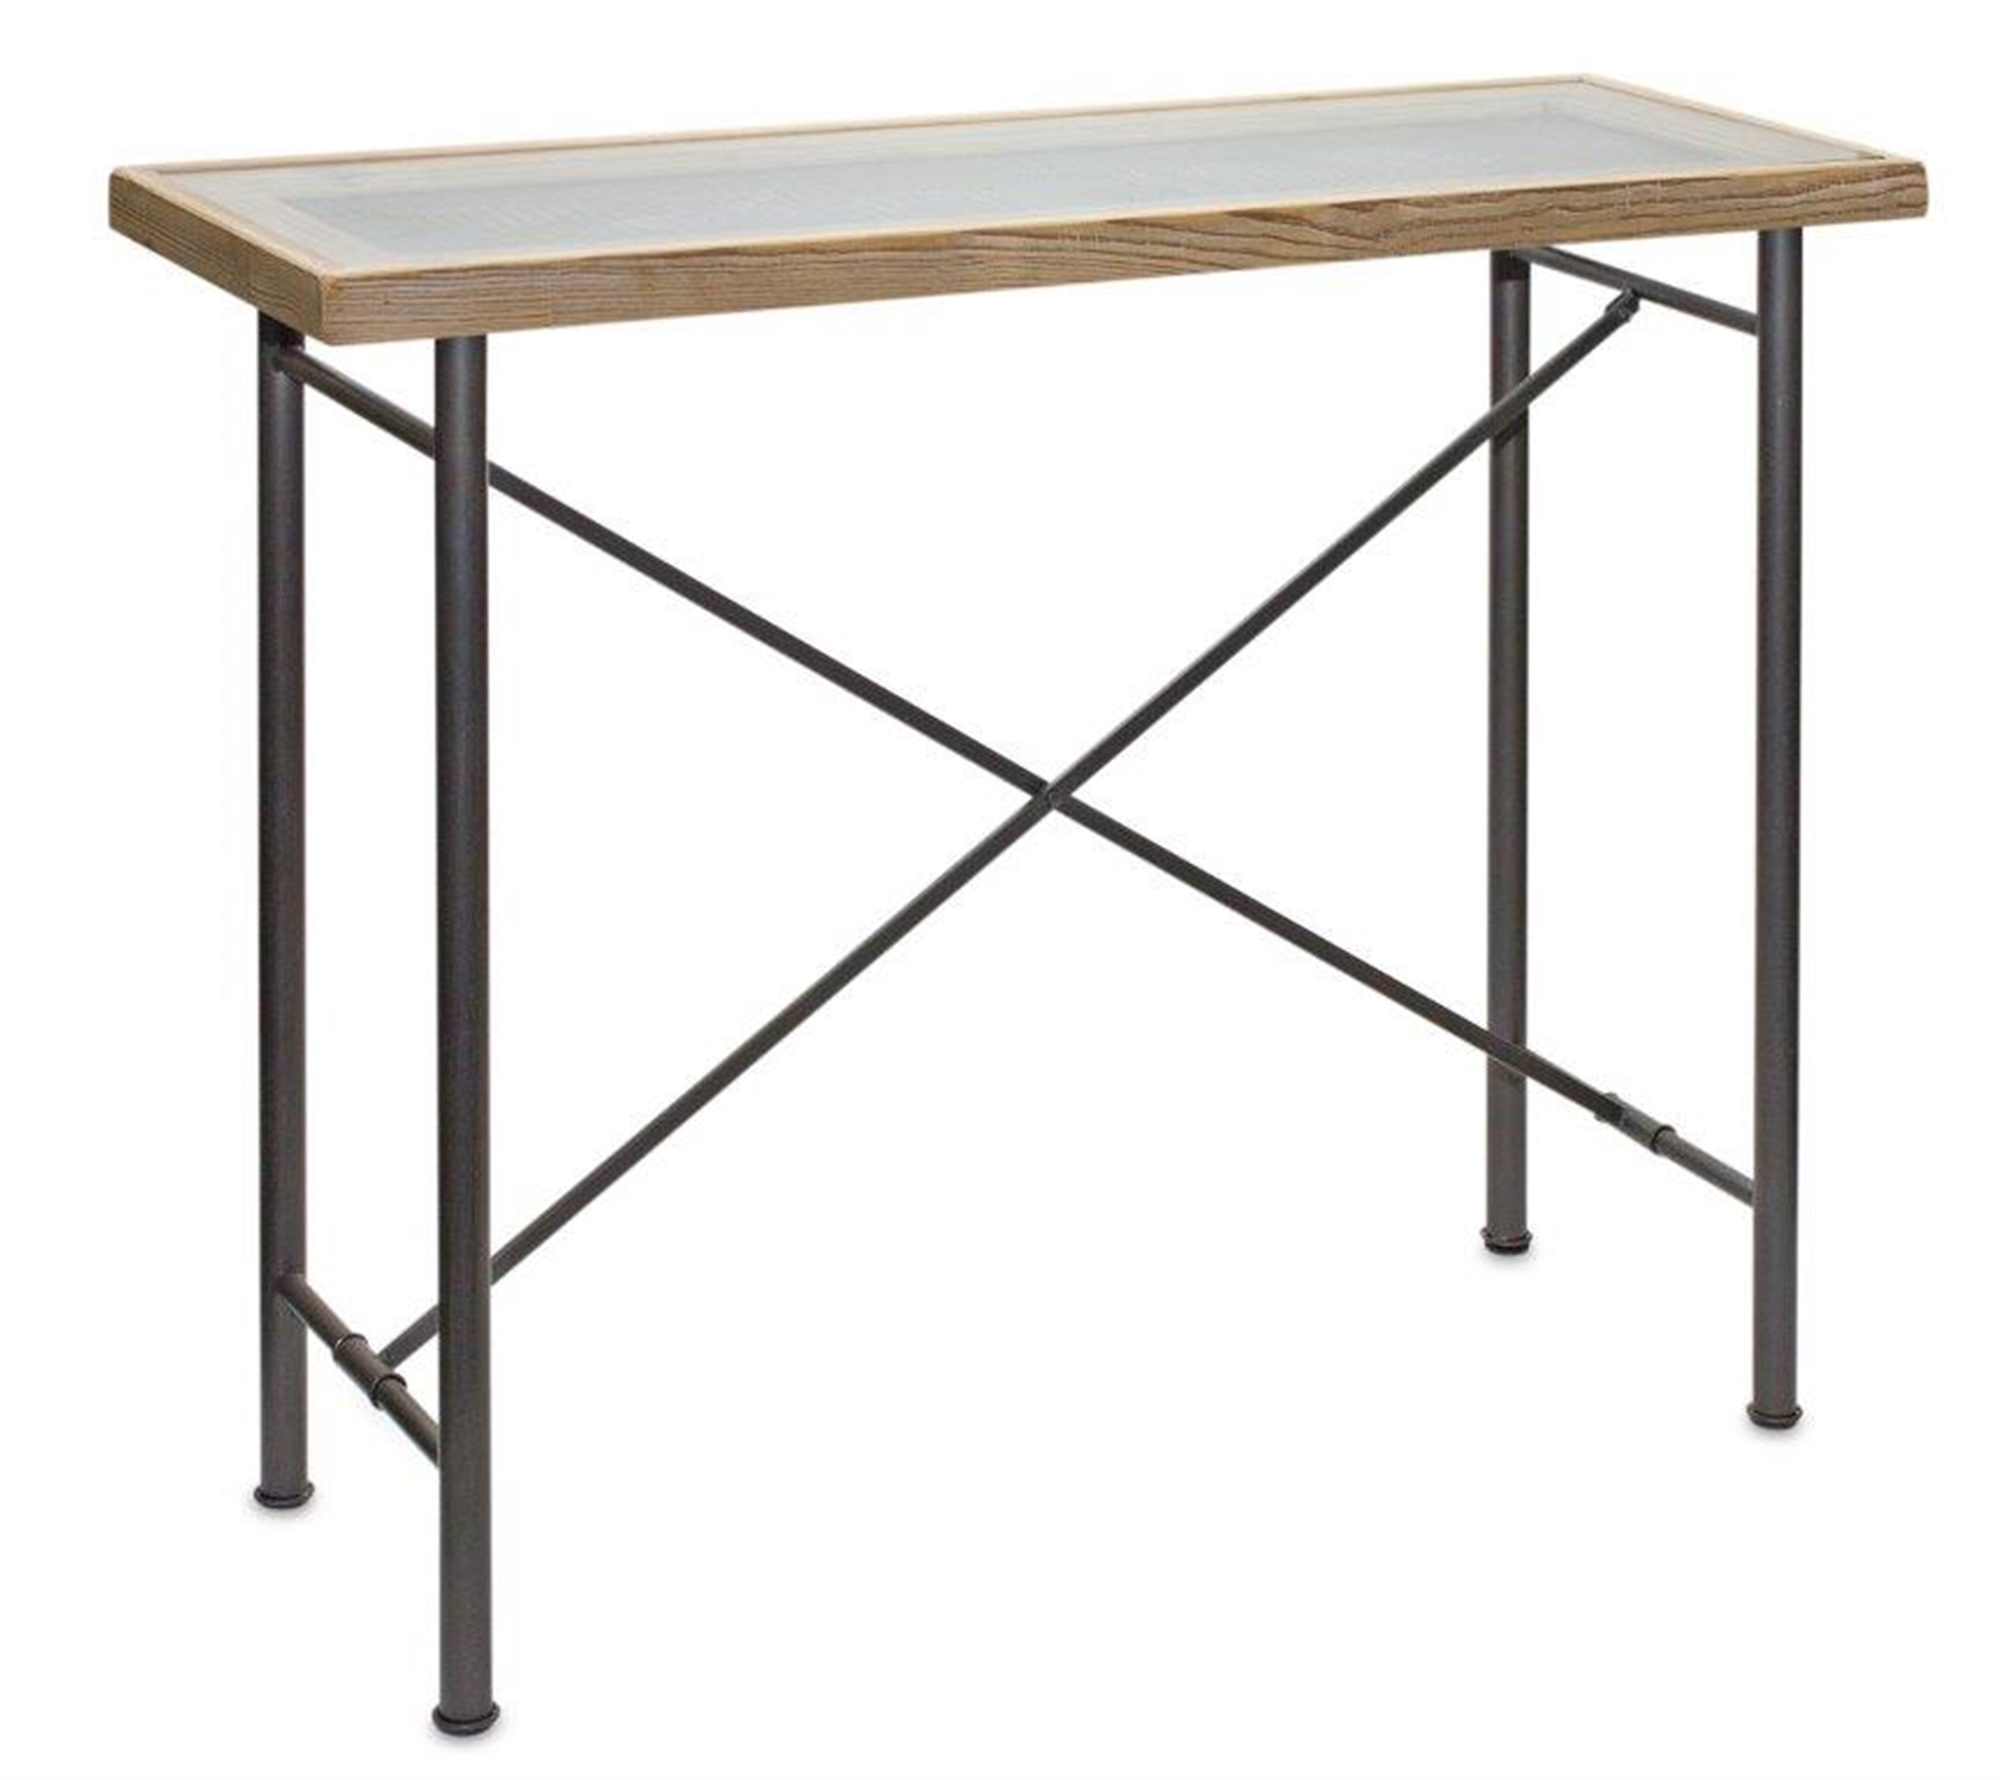 Table with Glass Top 39.75"L x 15"W x 31.5"H Wood/Metal/Glass